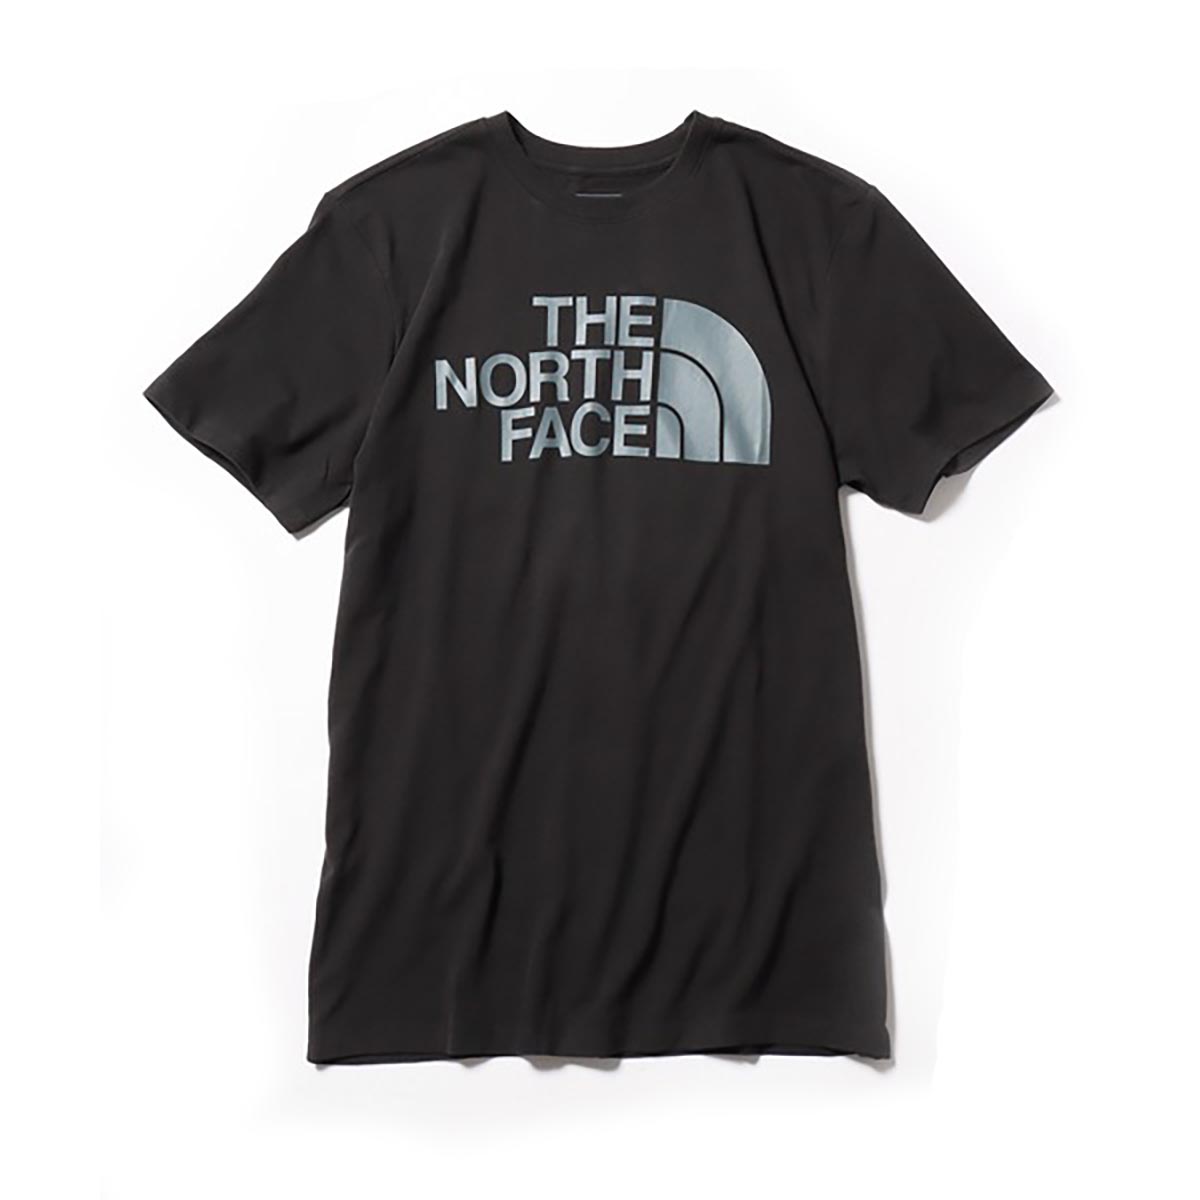 THE NORTH FACE ザ・ノース・フェイス Tシャツ NF0A4M4P Short Sleeve 